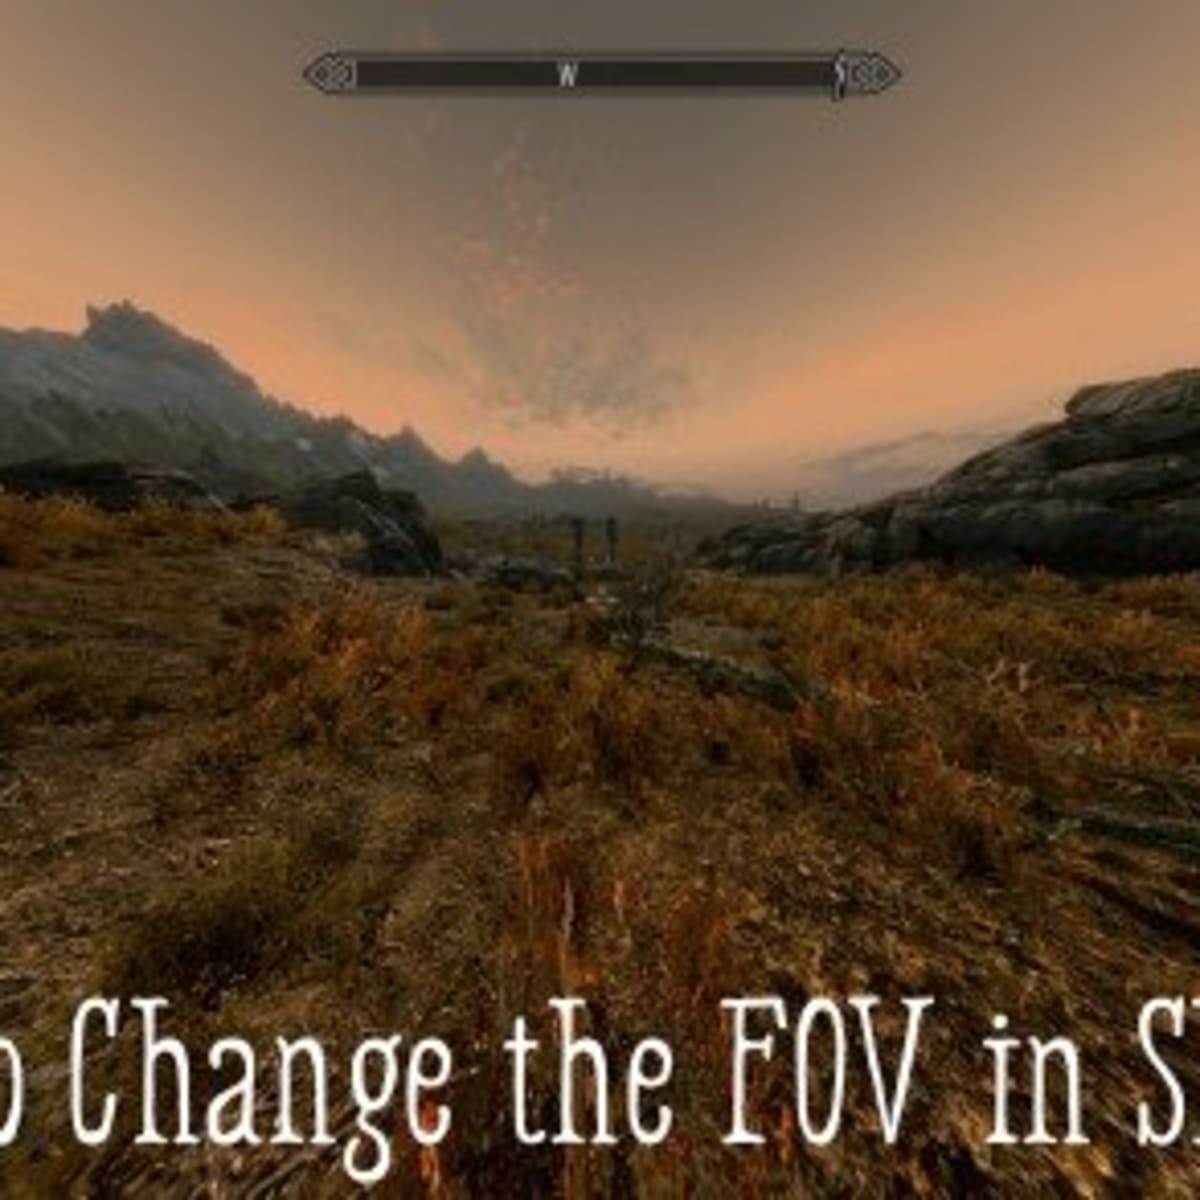 How To Change The Fov In Skyrim Levelskip